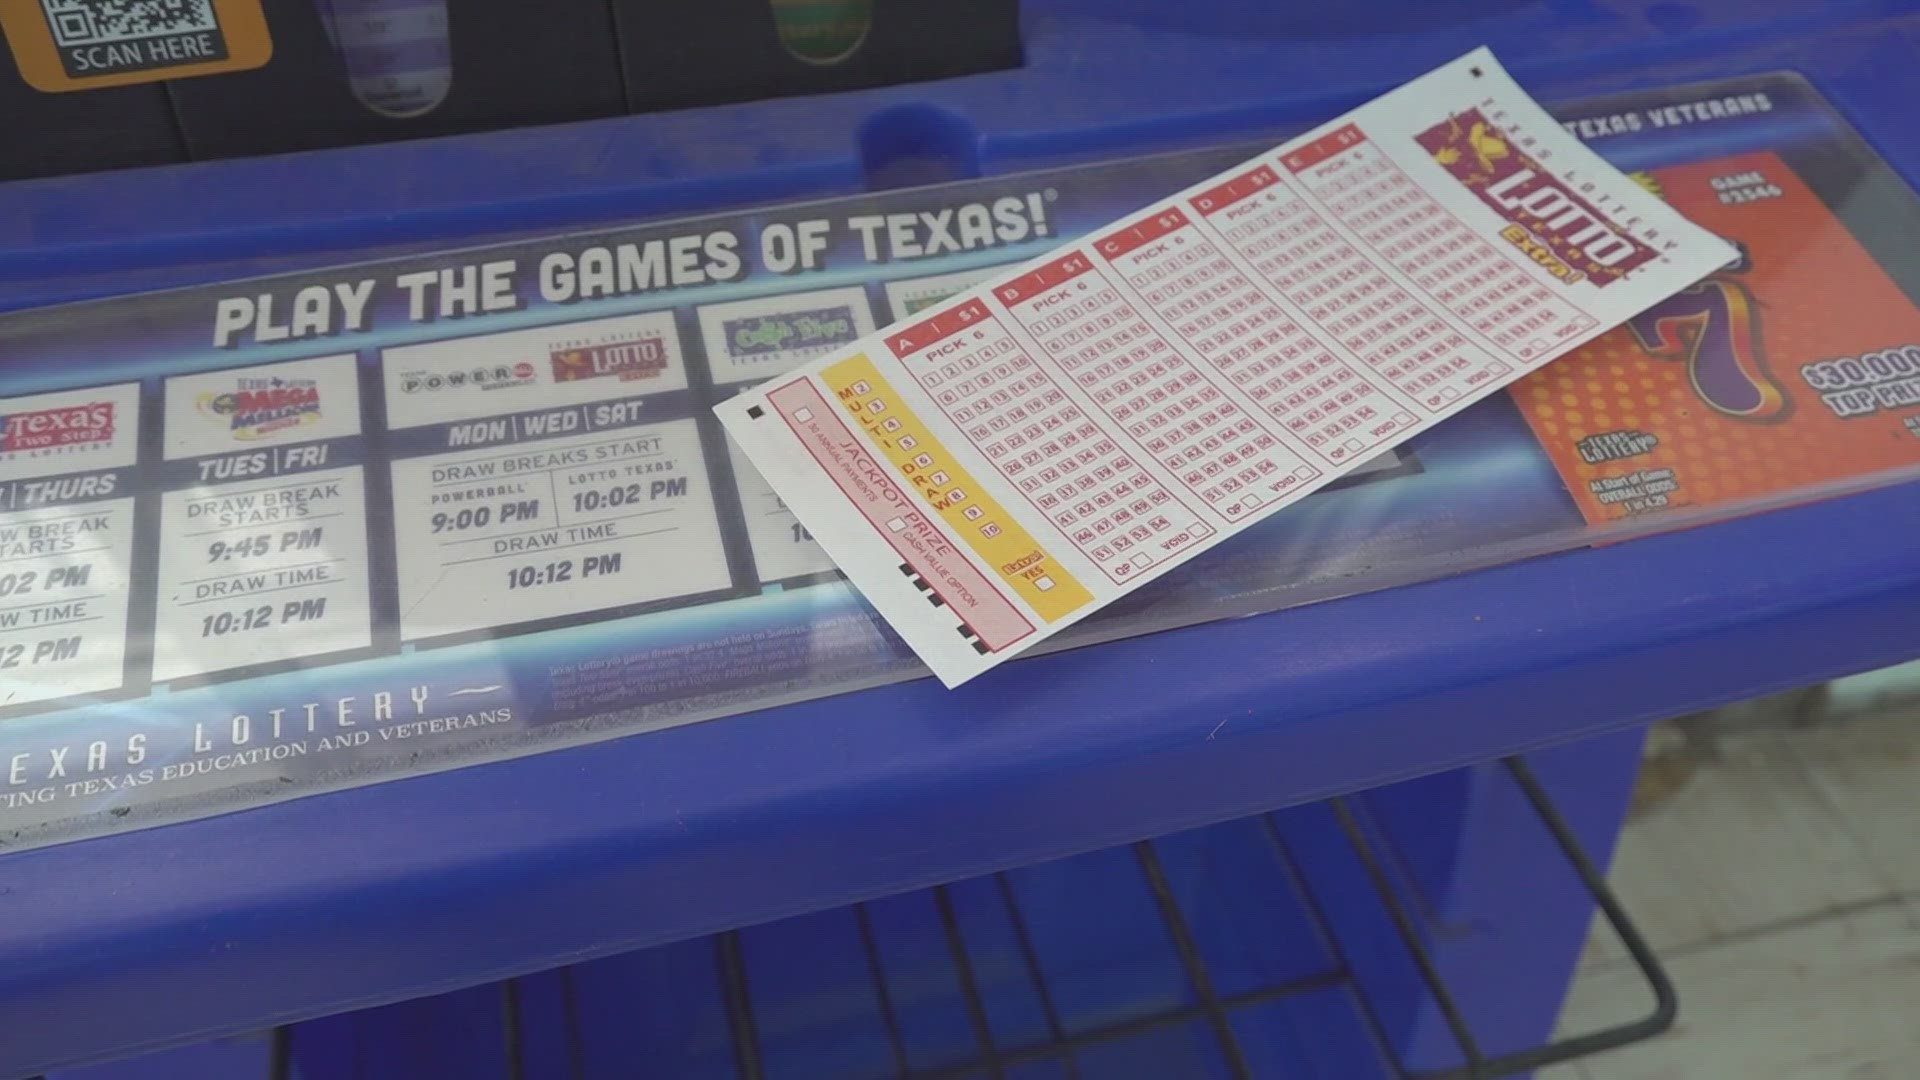 Heifer's N Convenience Store sold the only jackpot-winning ticket. The winner will get over $10 million before taxes. The store is proud of the distinction.